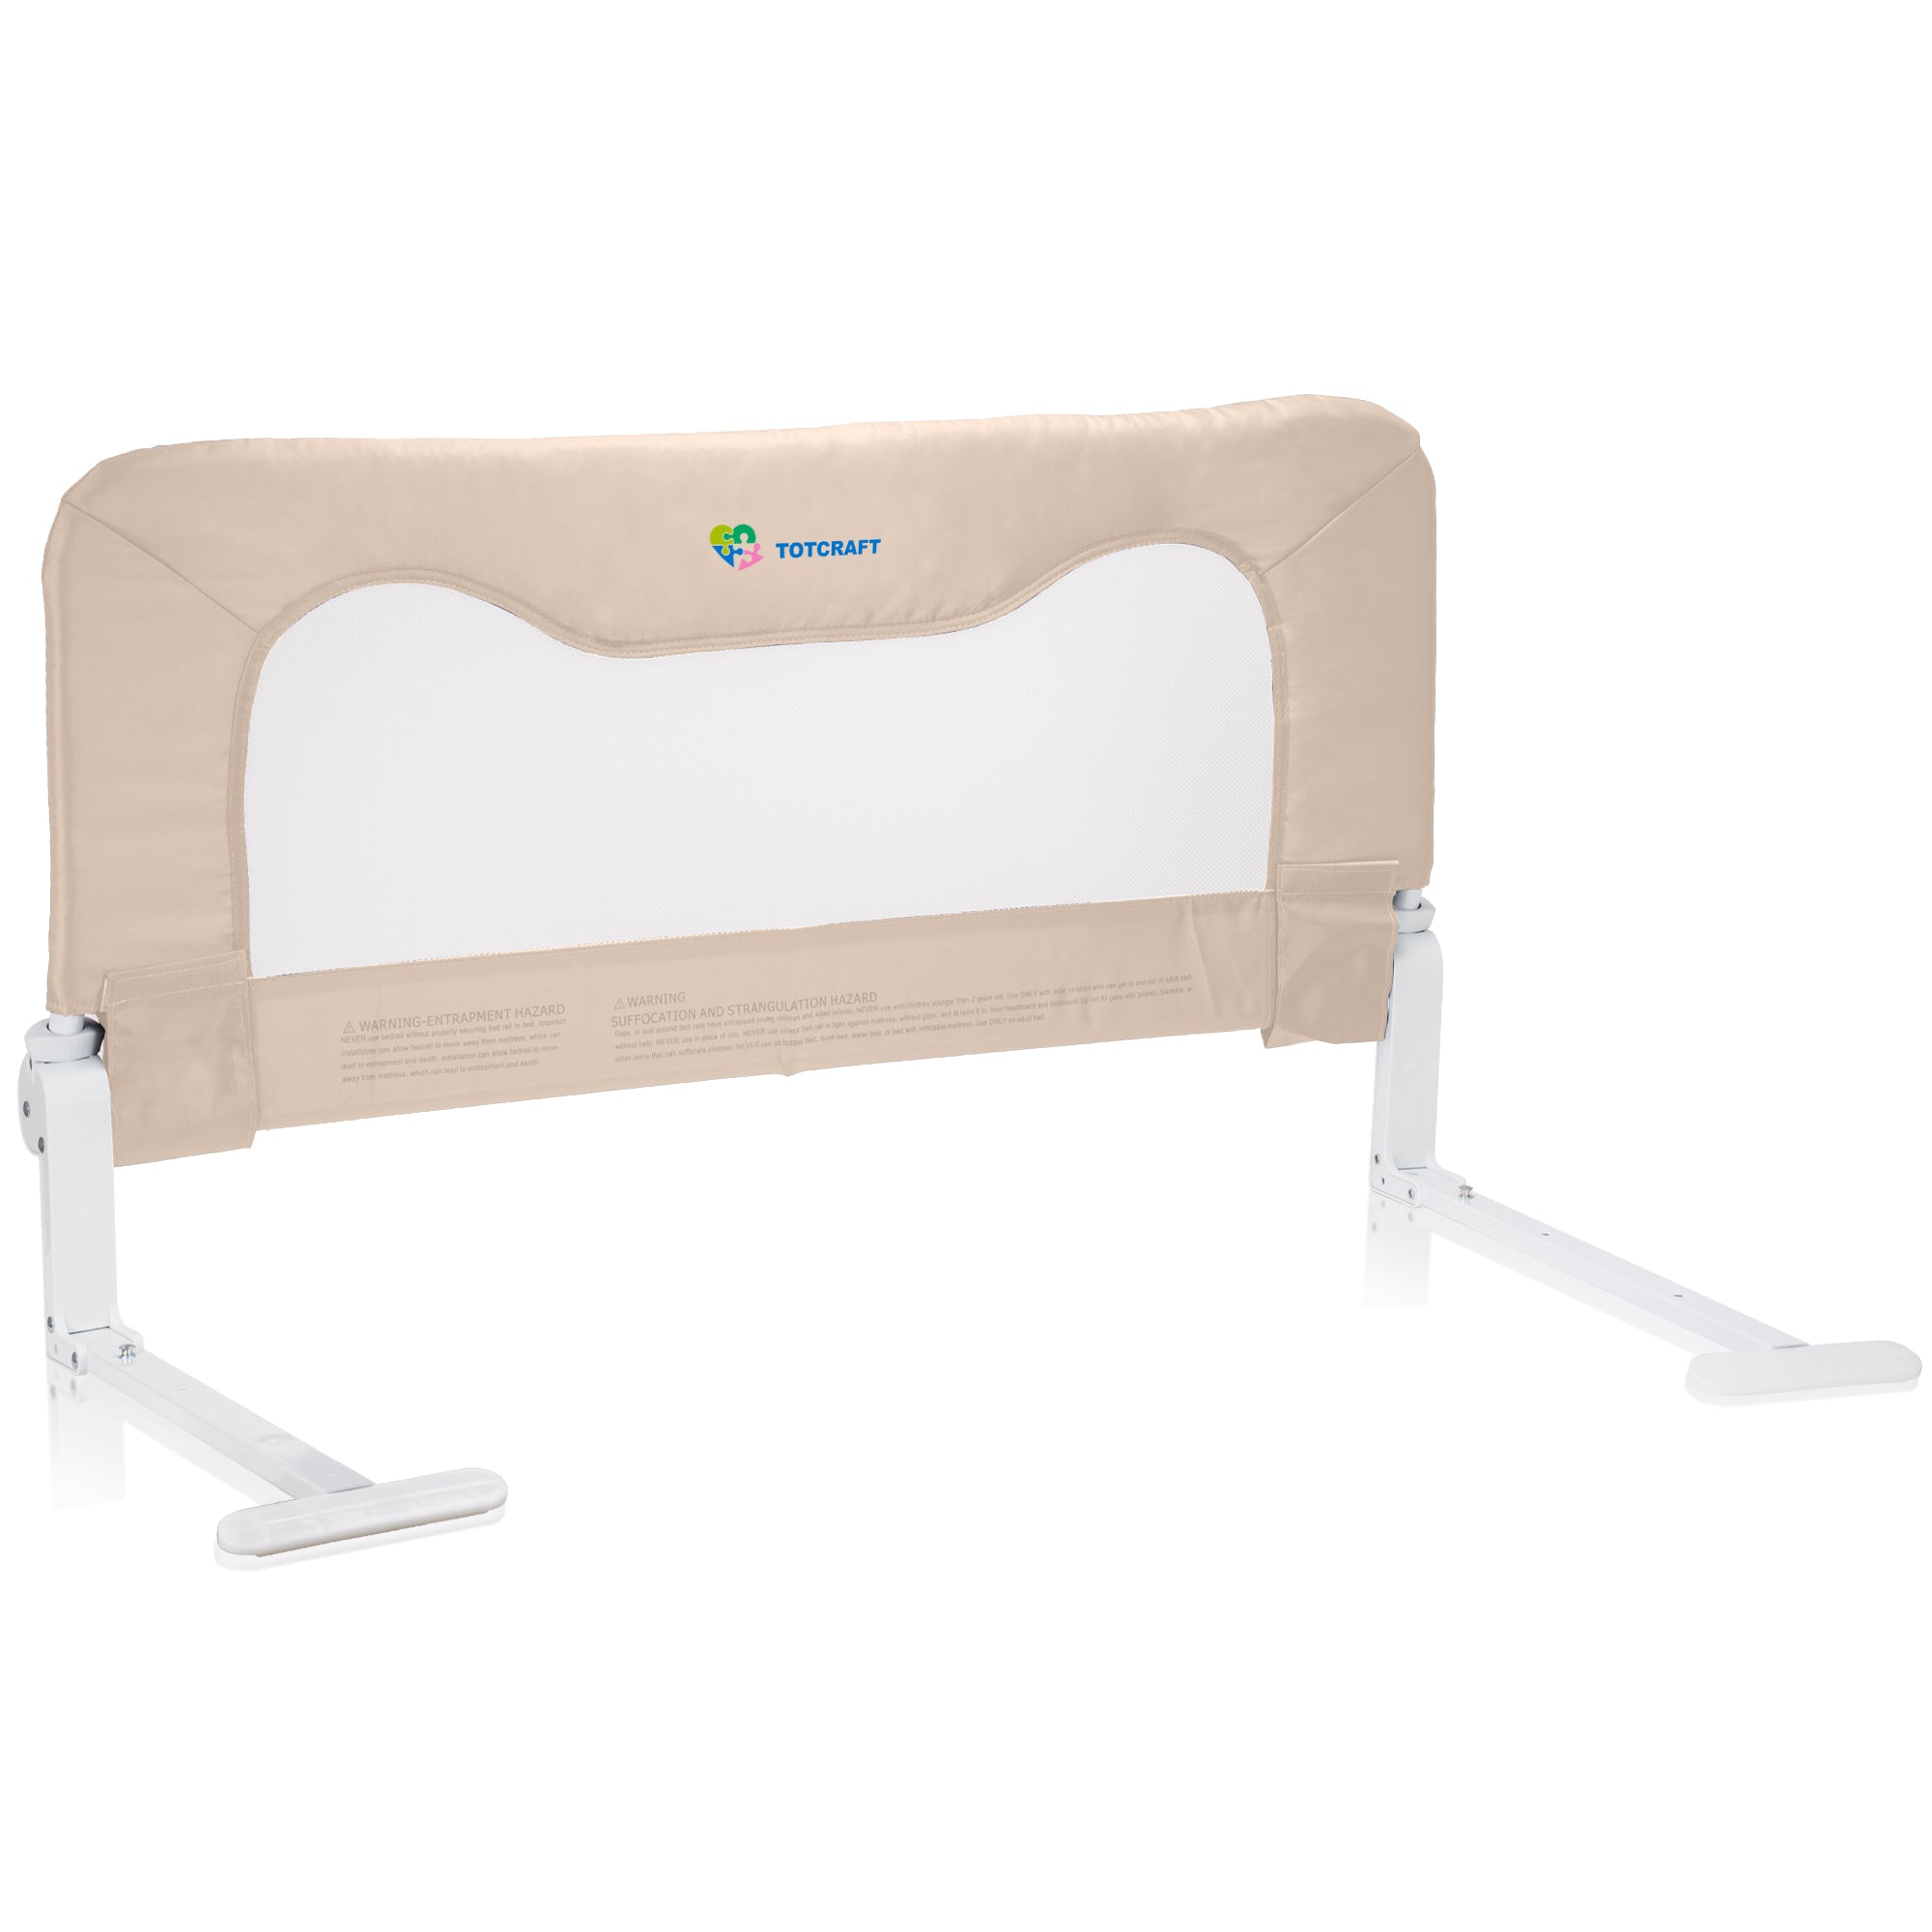 side bed rails for toddlers